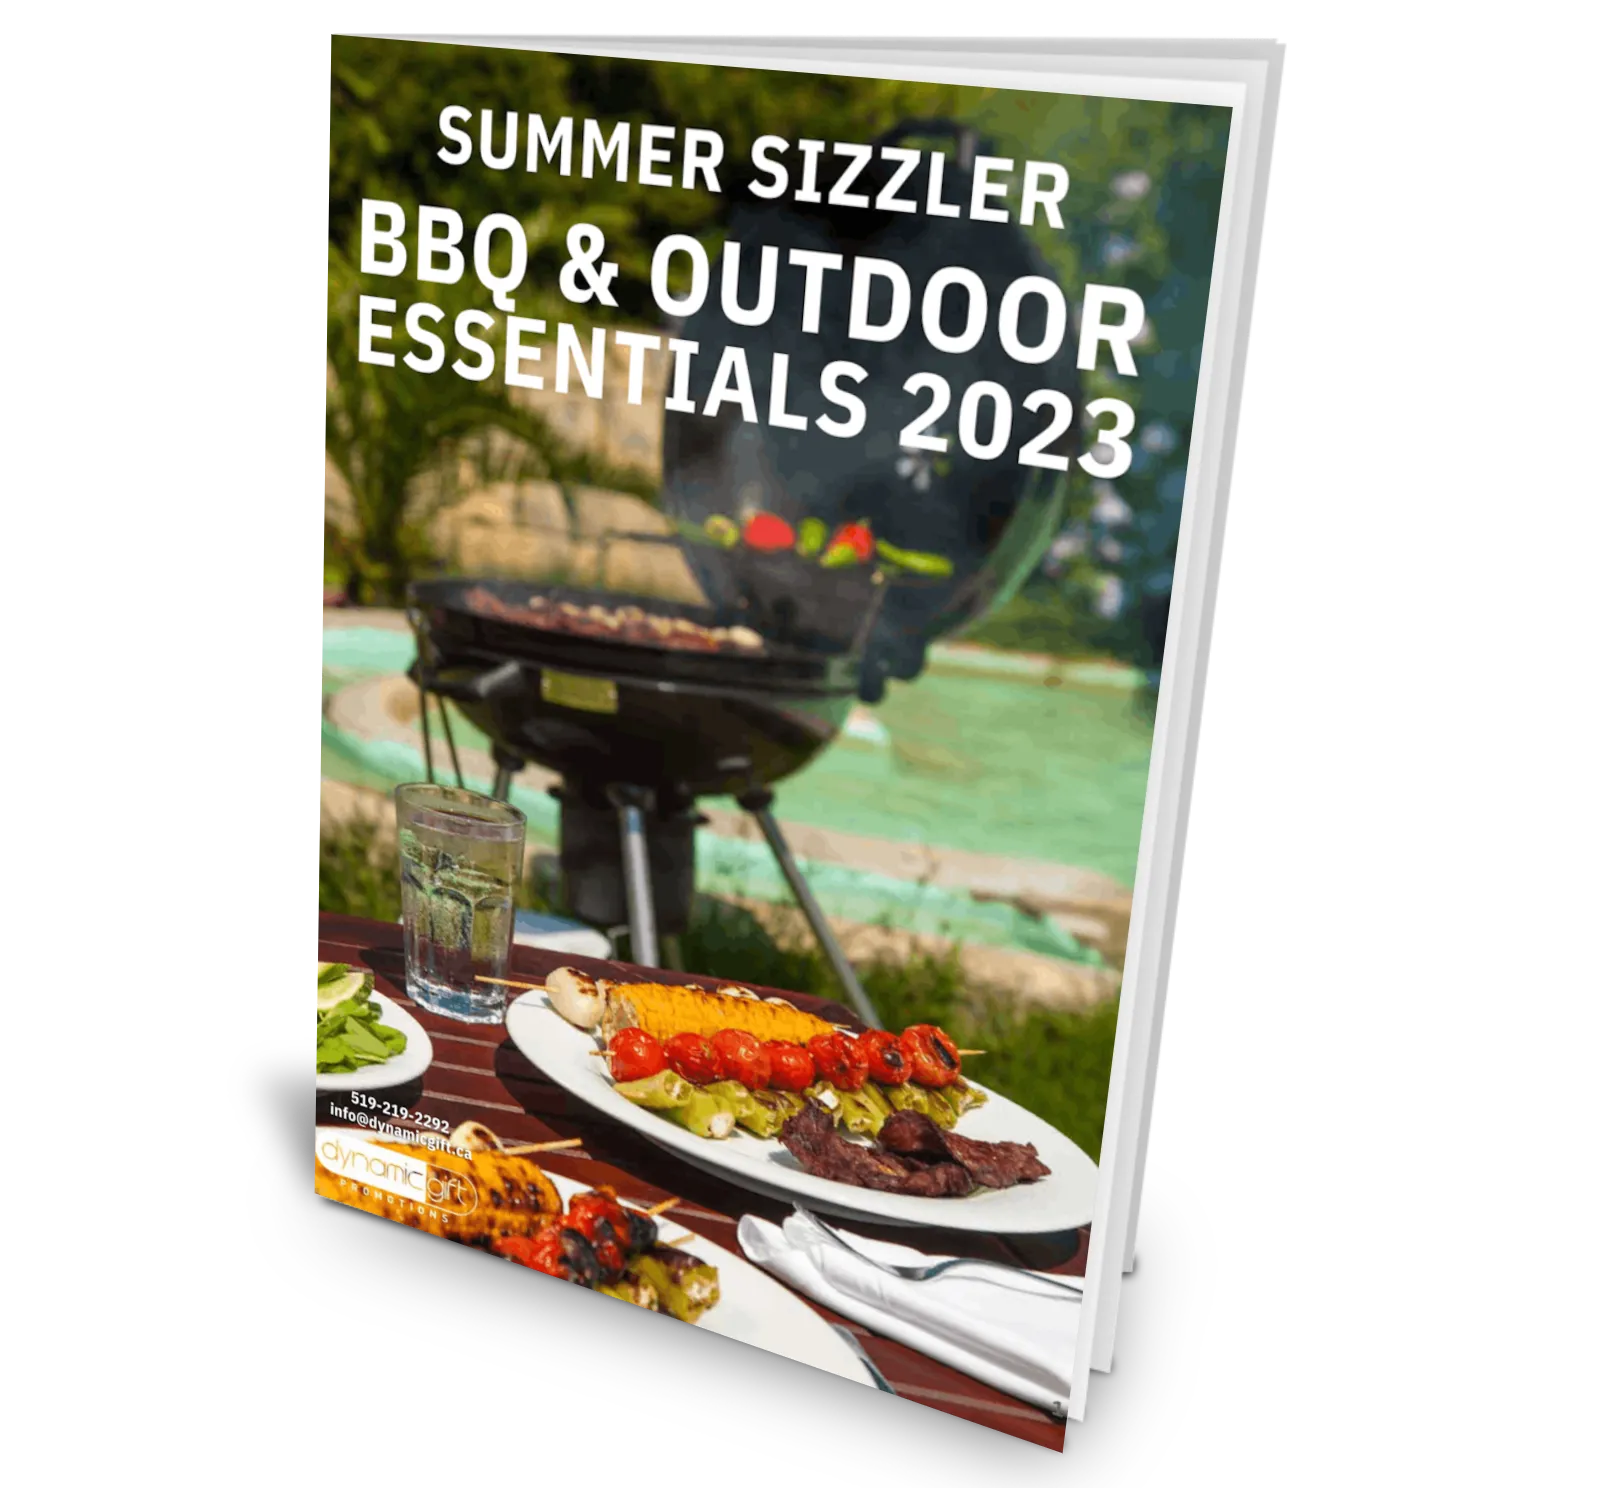 BBQ & Outdoor Essentials catalogue by Dynamic Gift